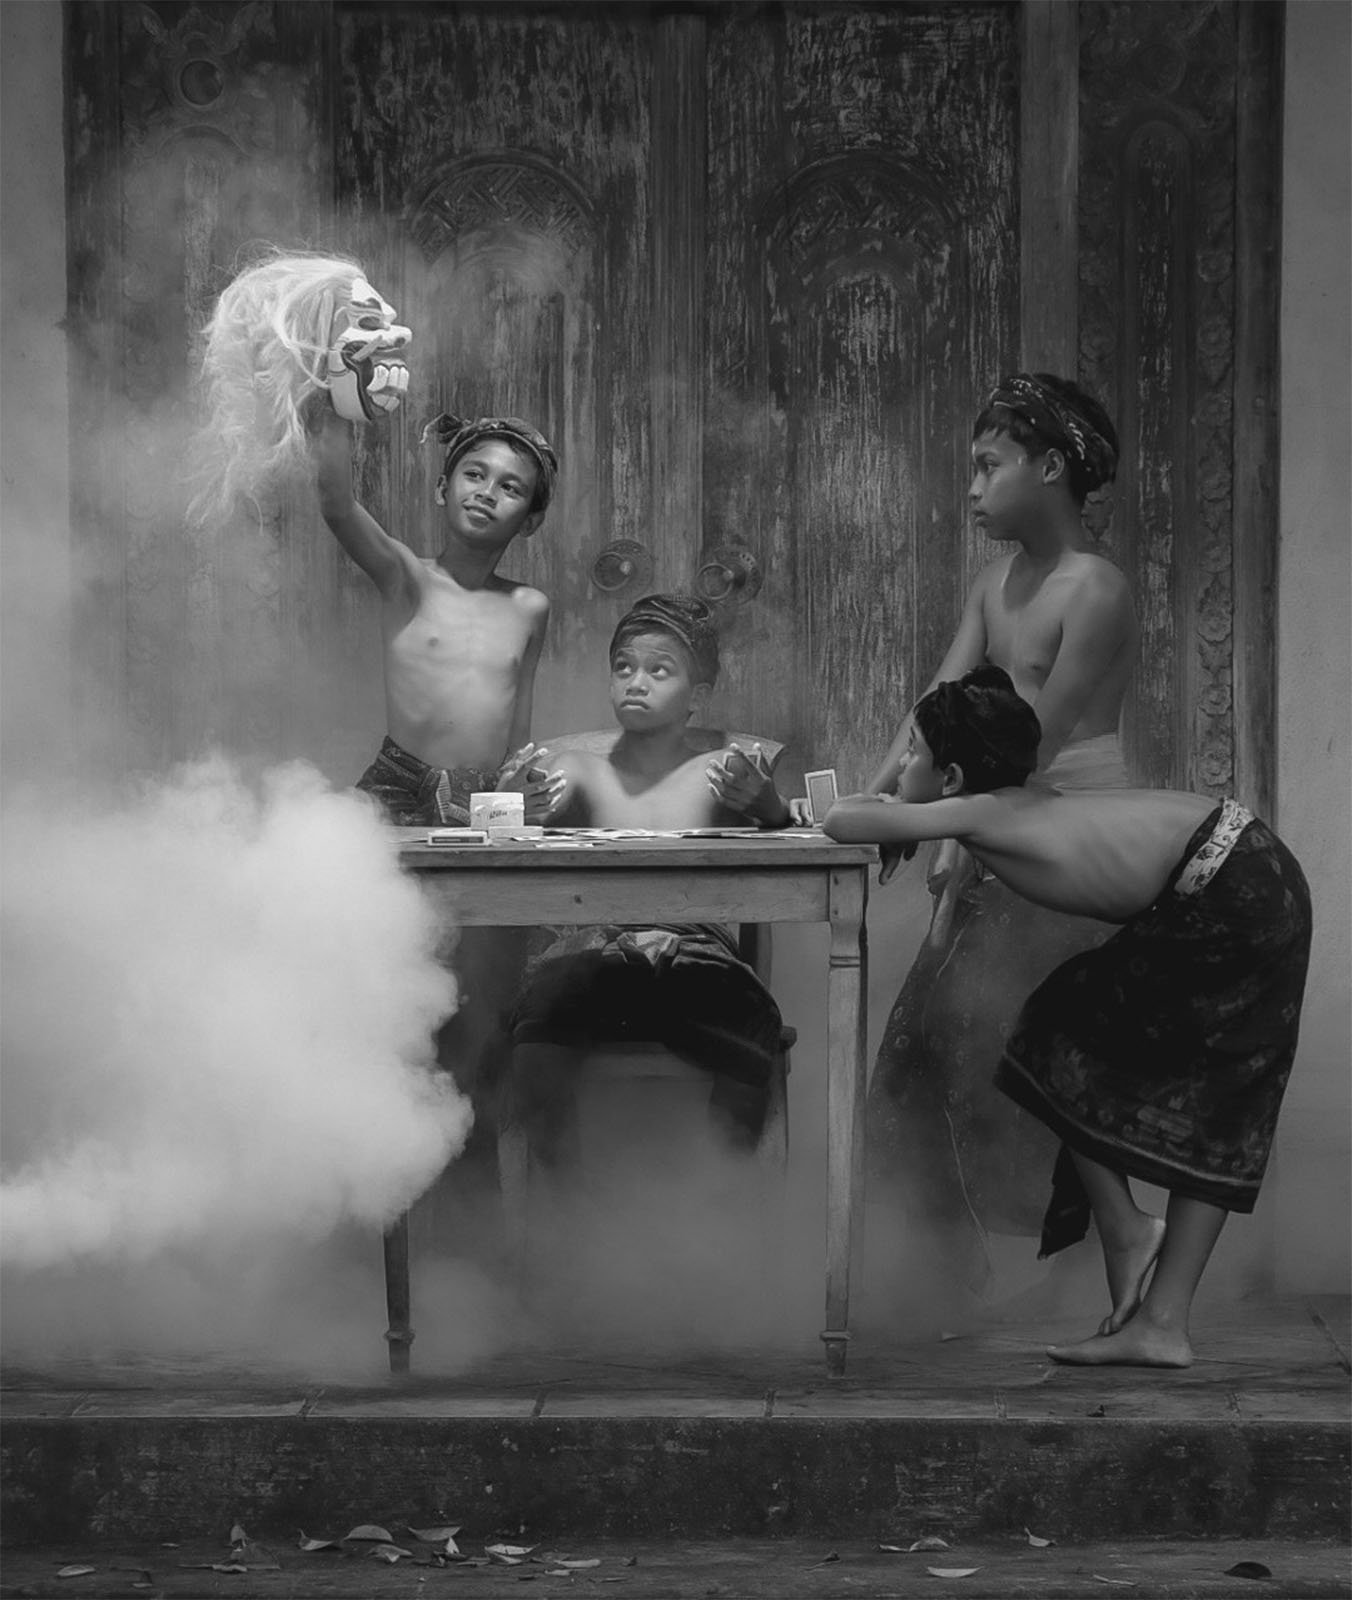 A black-and-white photograph depicts four children wearing traditional clothing. One child holds up a puppet head while others look on with interest. They are gathered around a wooden table, surrounded by a mysterious mist or smoke. The setting appears to be outdoors.